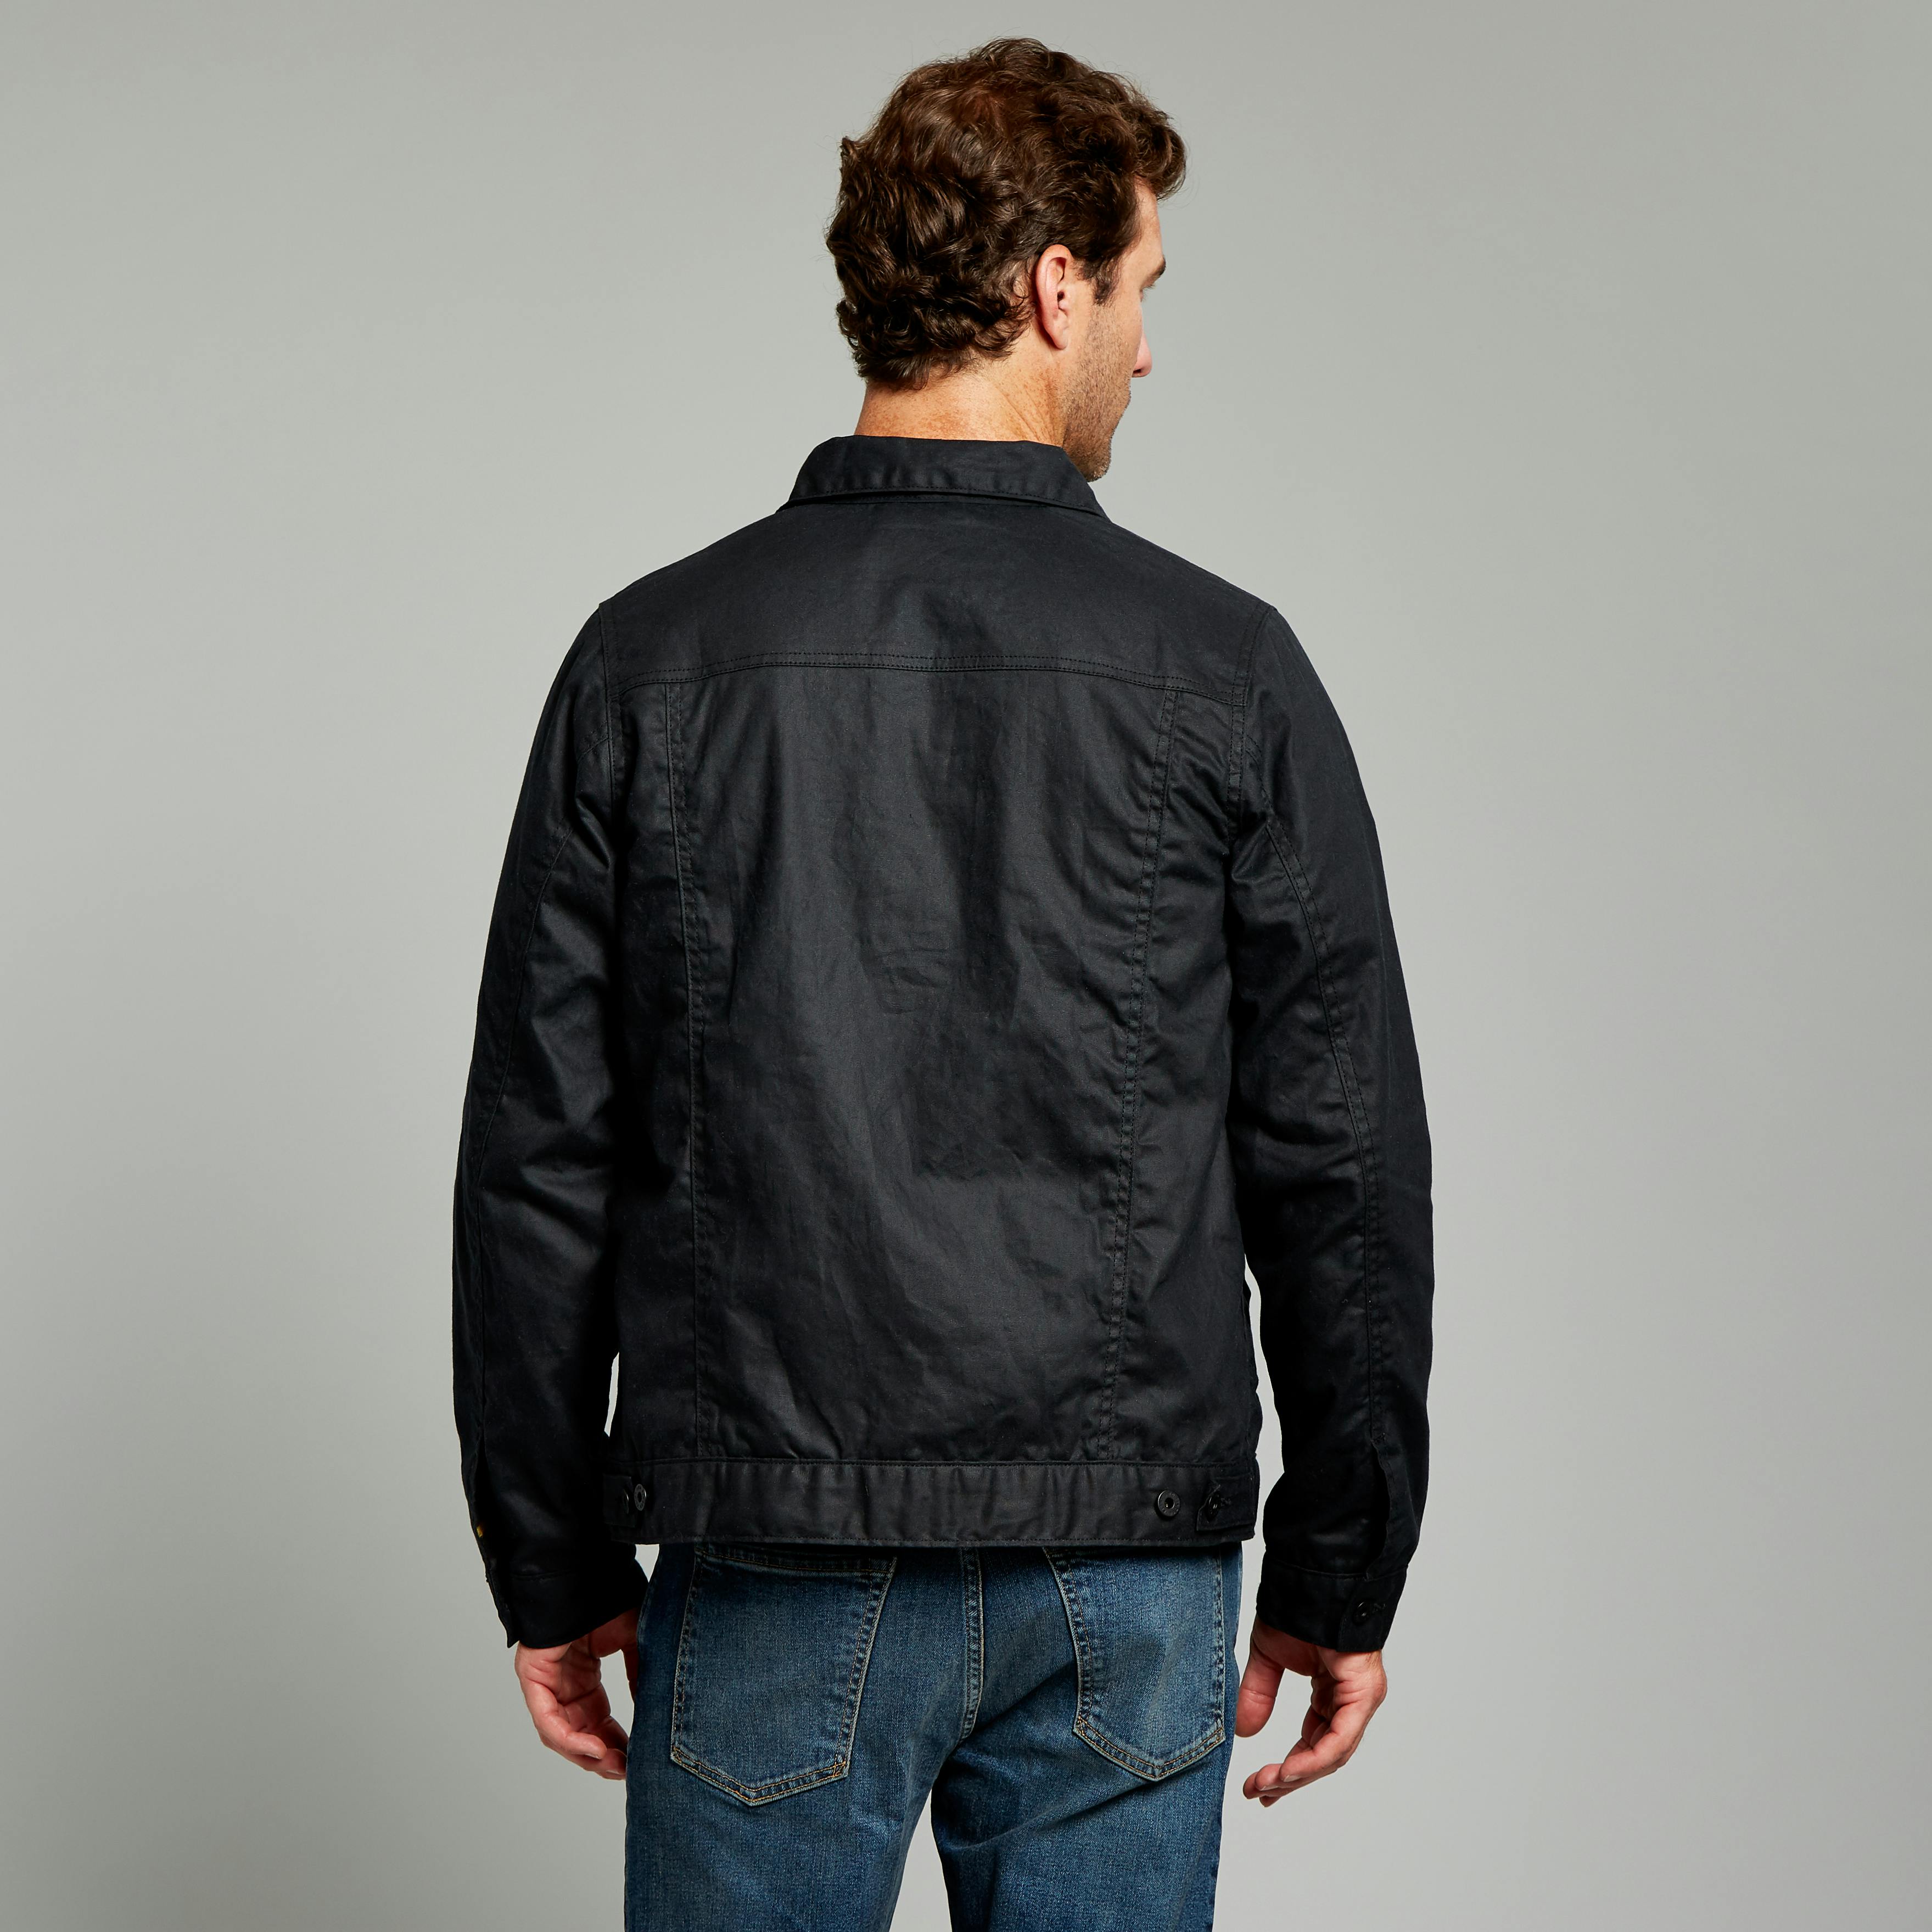 Flint and Tinder Flannel-lined Waxed Trucker Jacket